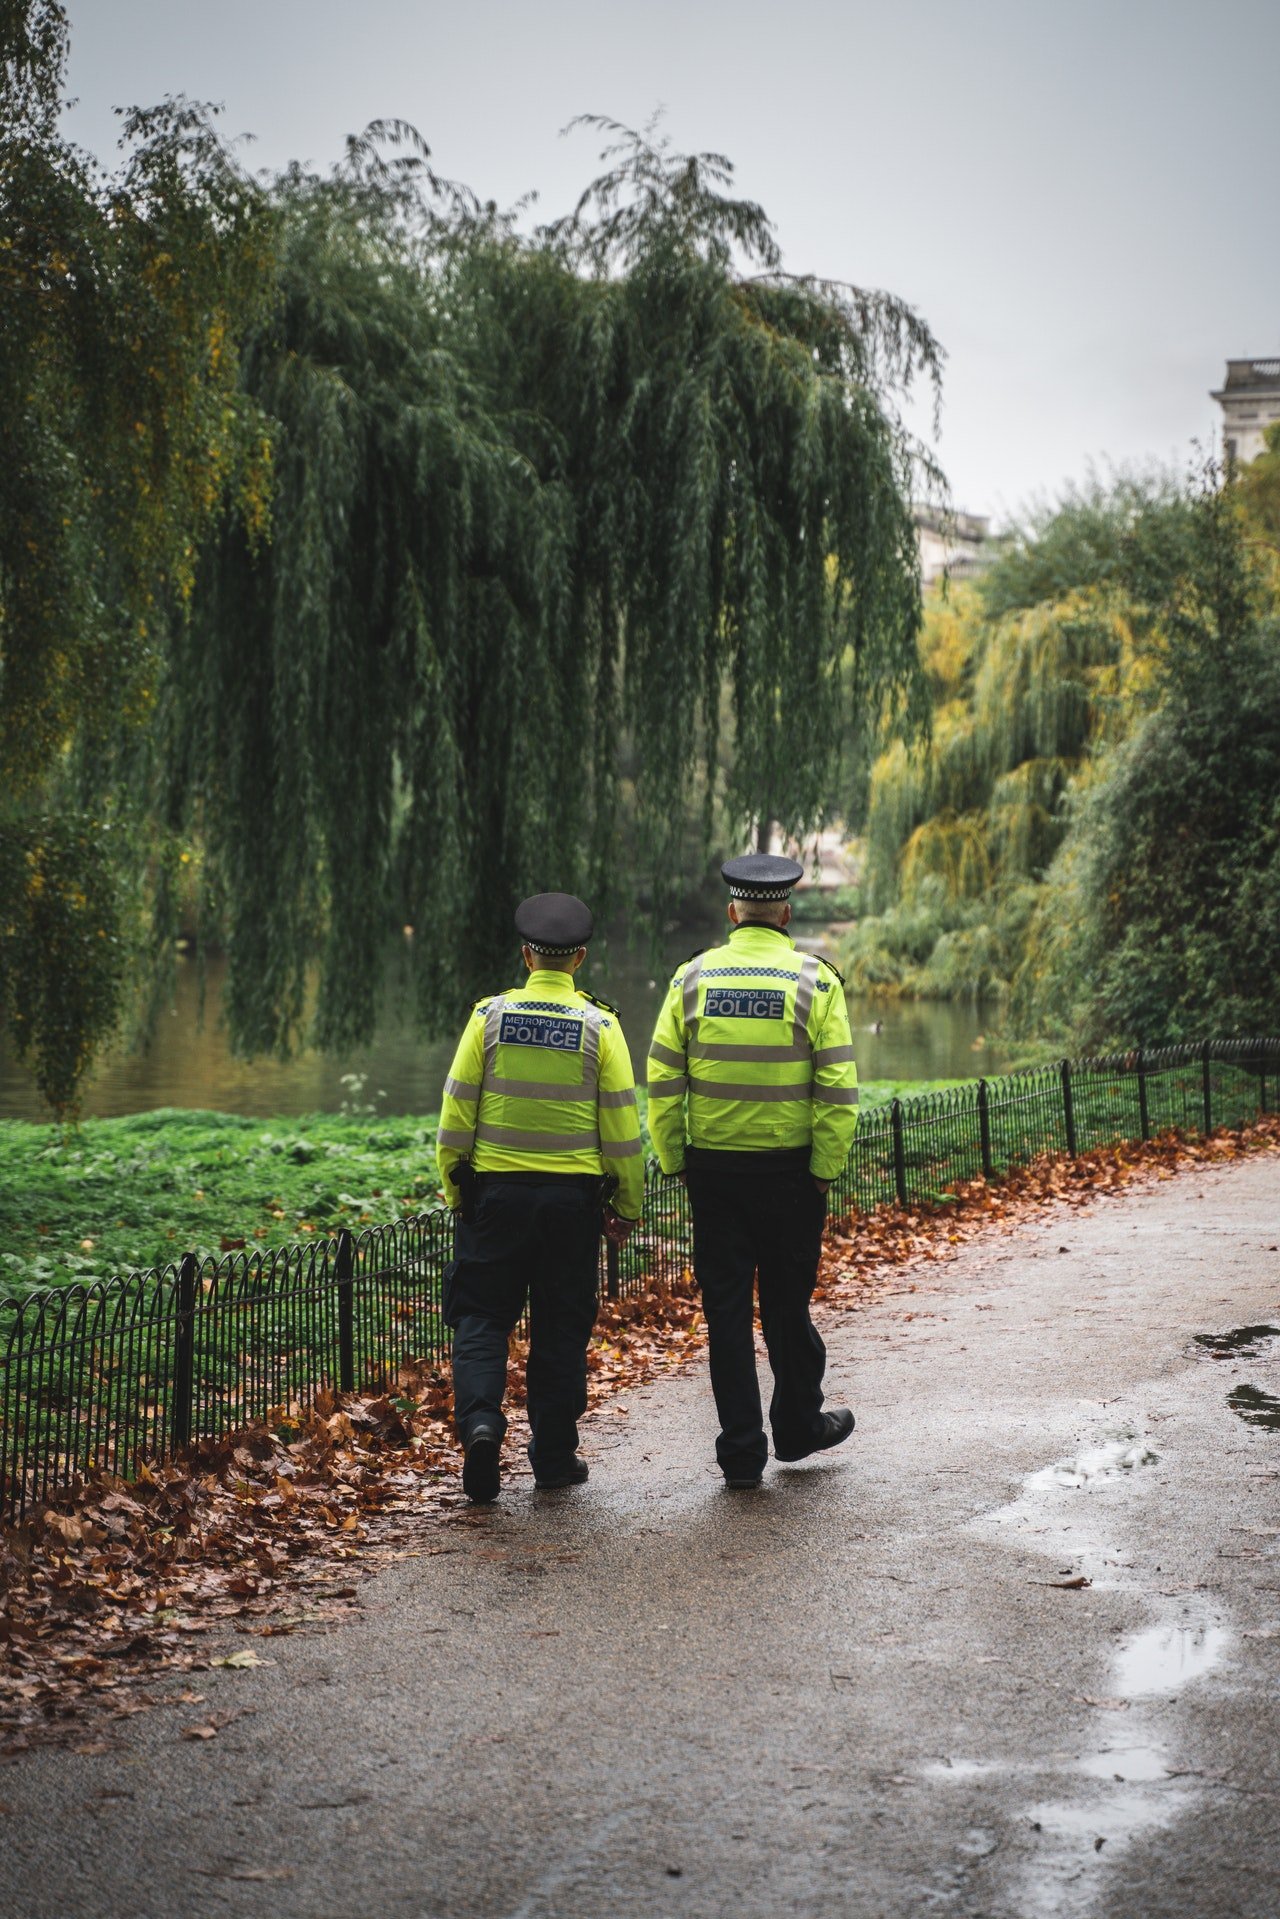 Two police officers walking down the road | Photo: Getty Images